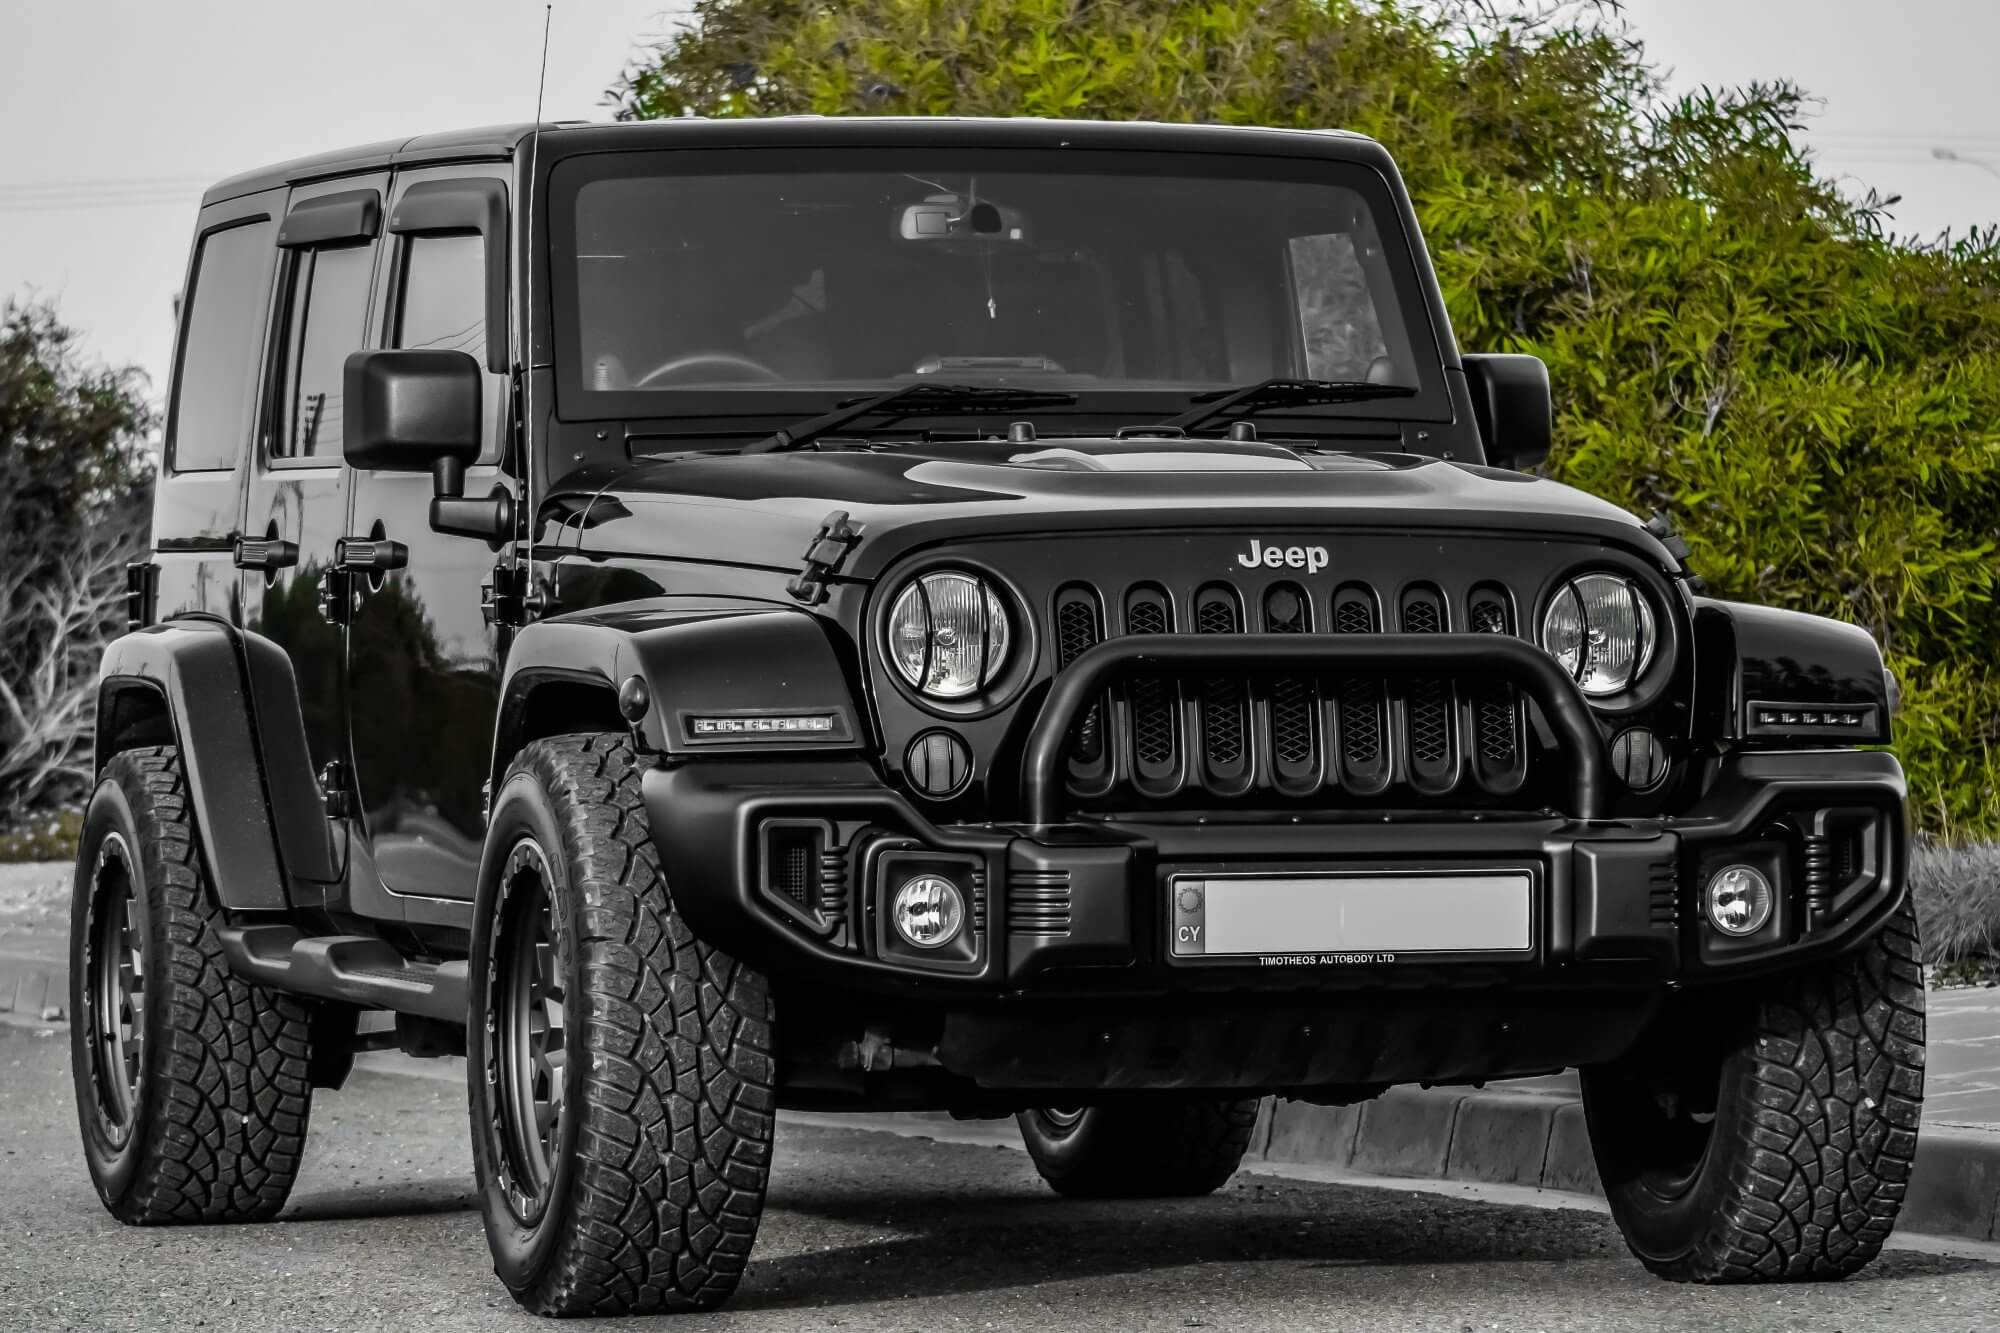 Do You Know How To Choose The Best Jeep Lift Kit For Your Jeep?